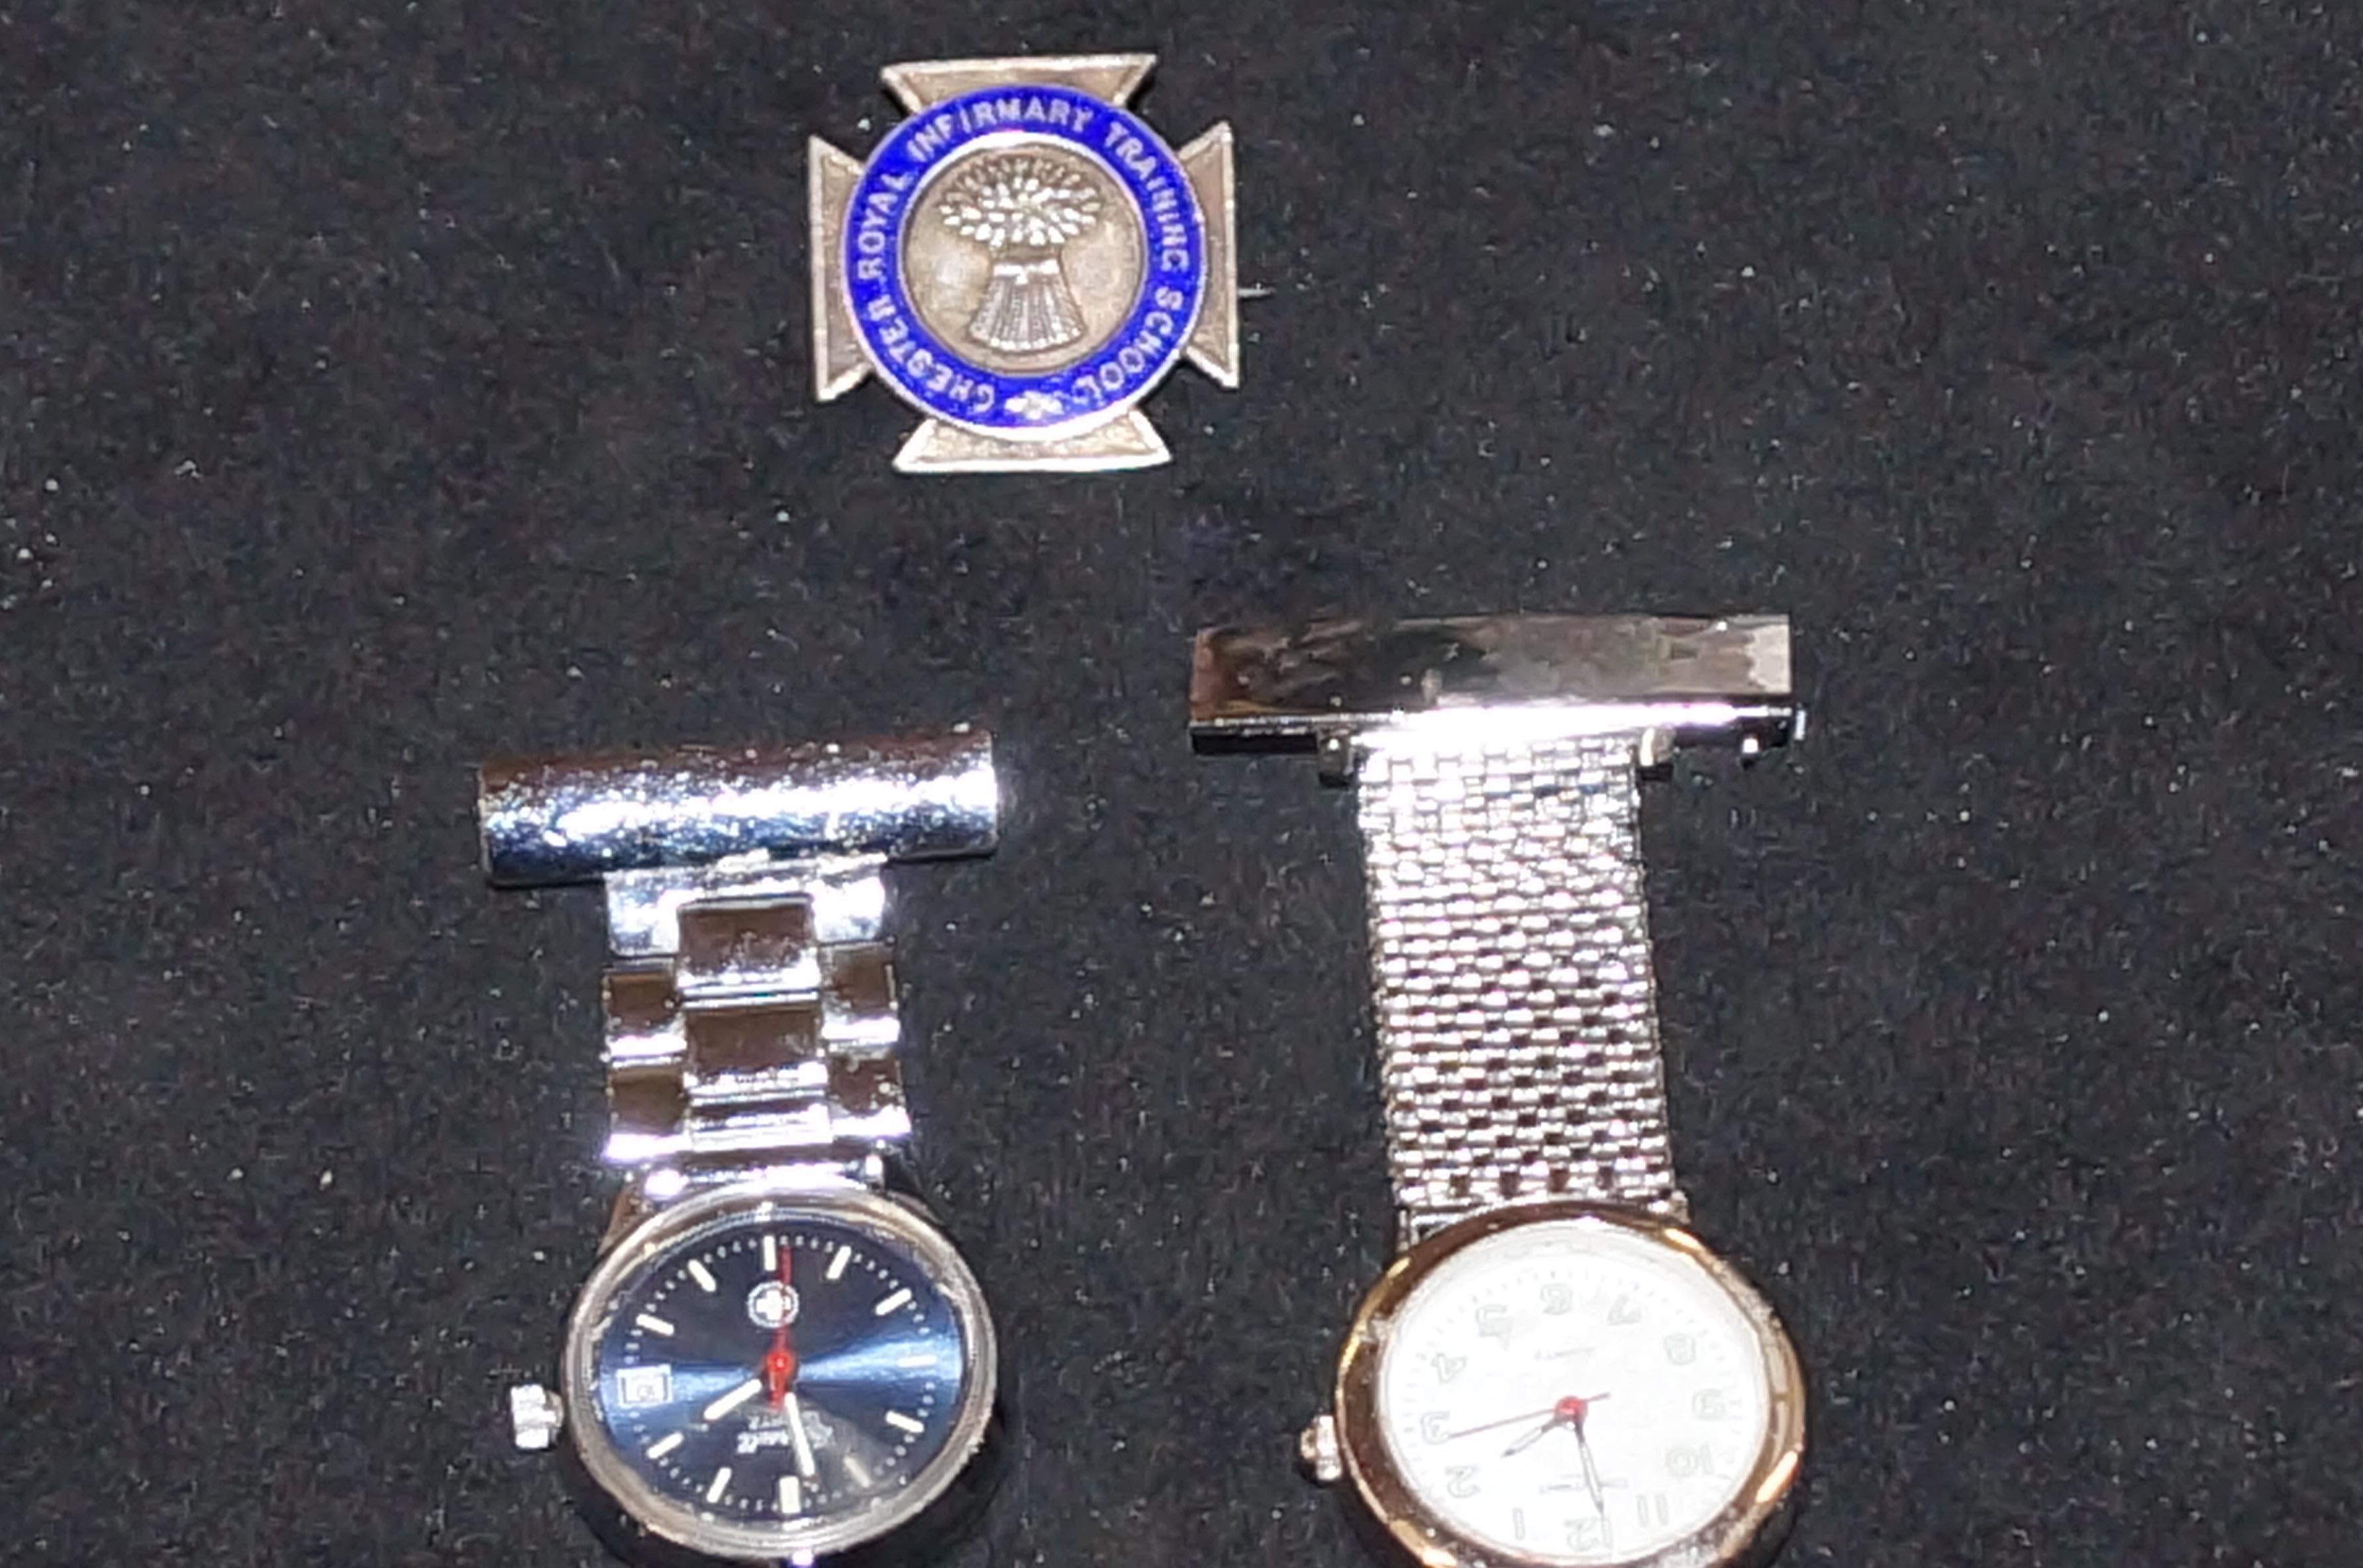 Two nurses fob watches with related silver enamel